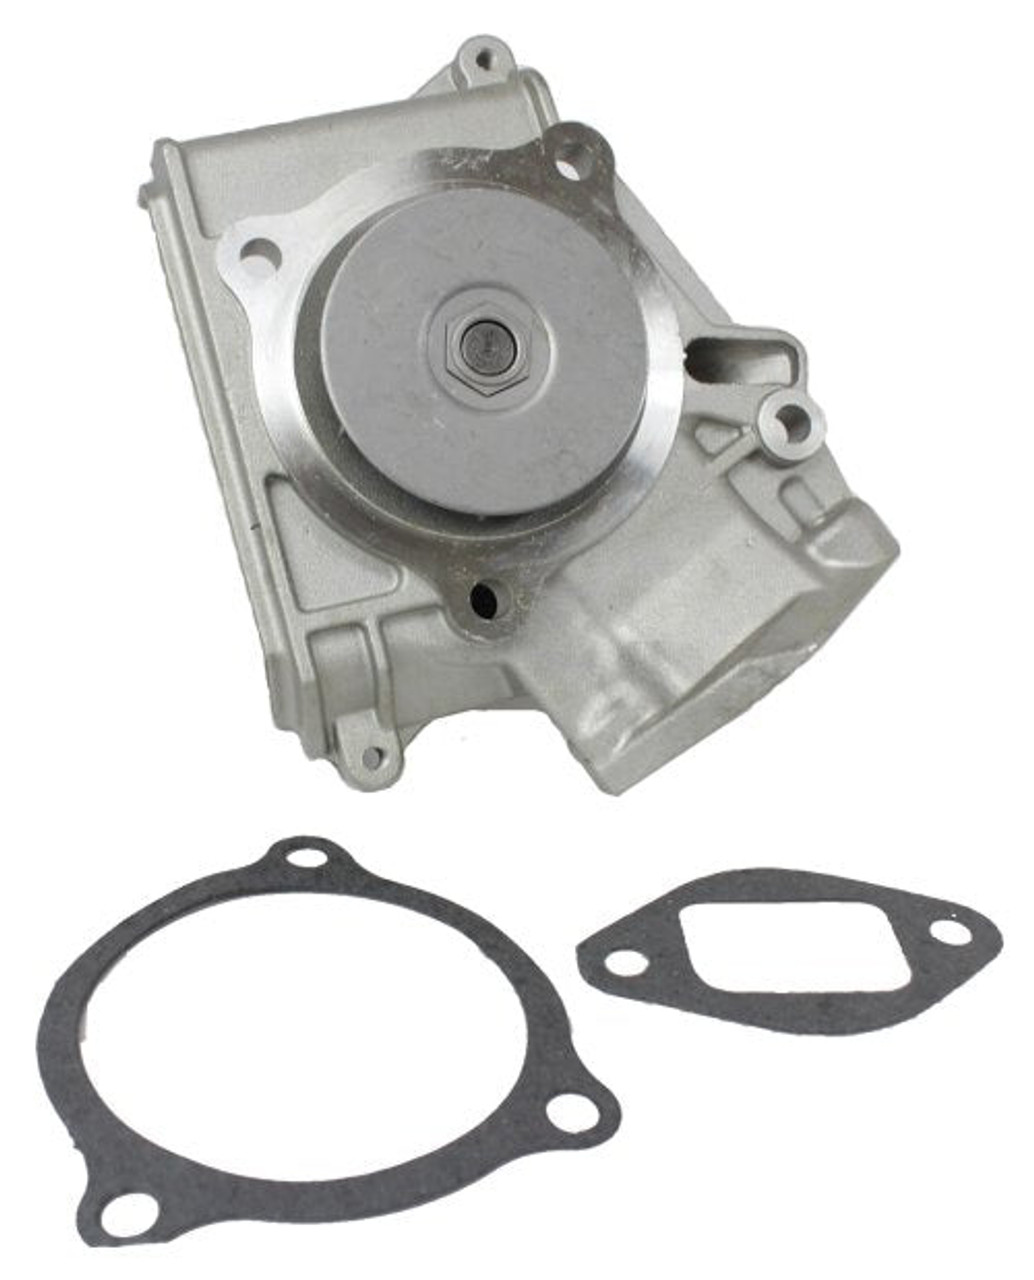 Water Pump - 1995 Ford Aspire 1.3L Engine Parts # WP451ZE2